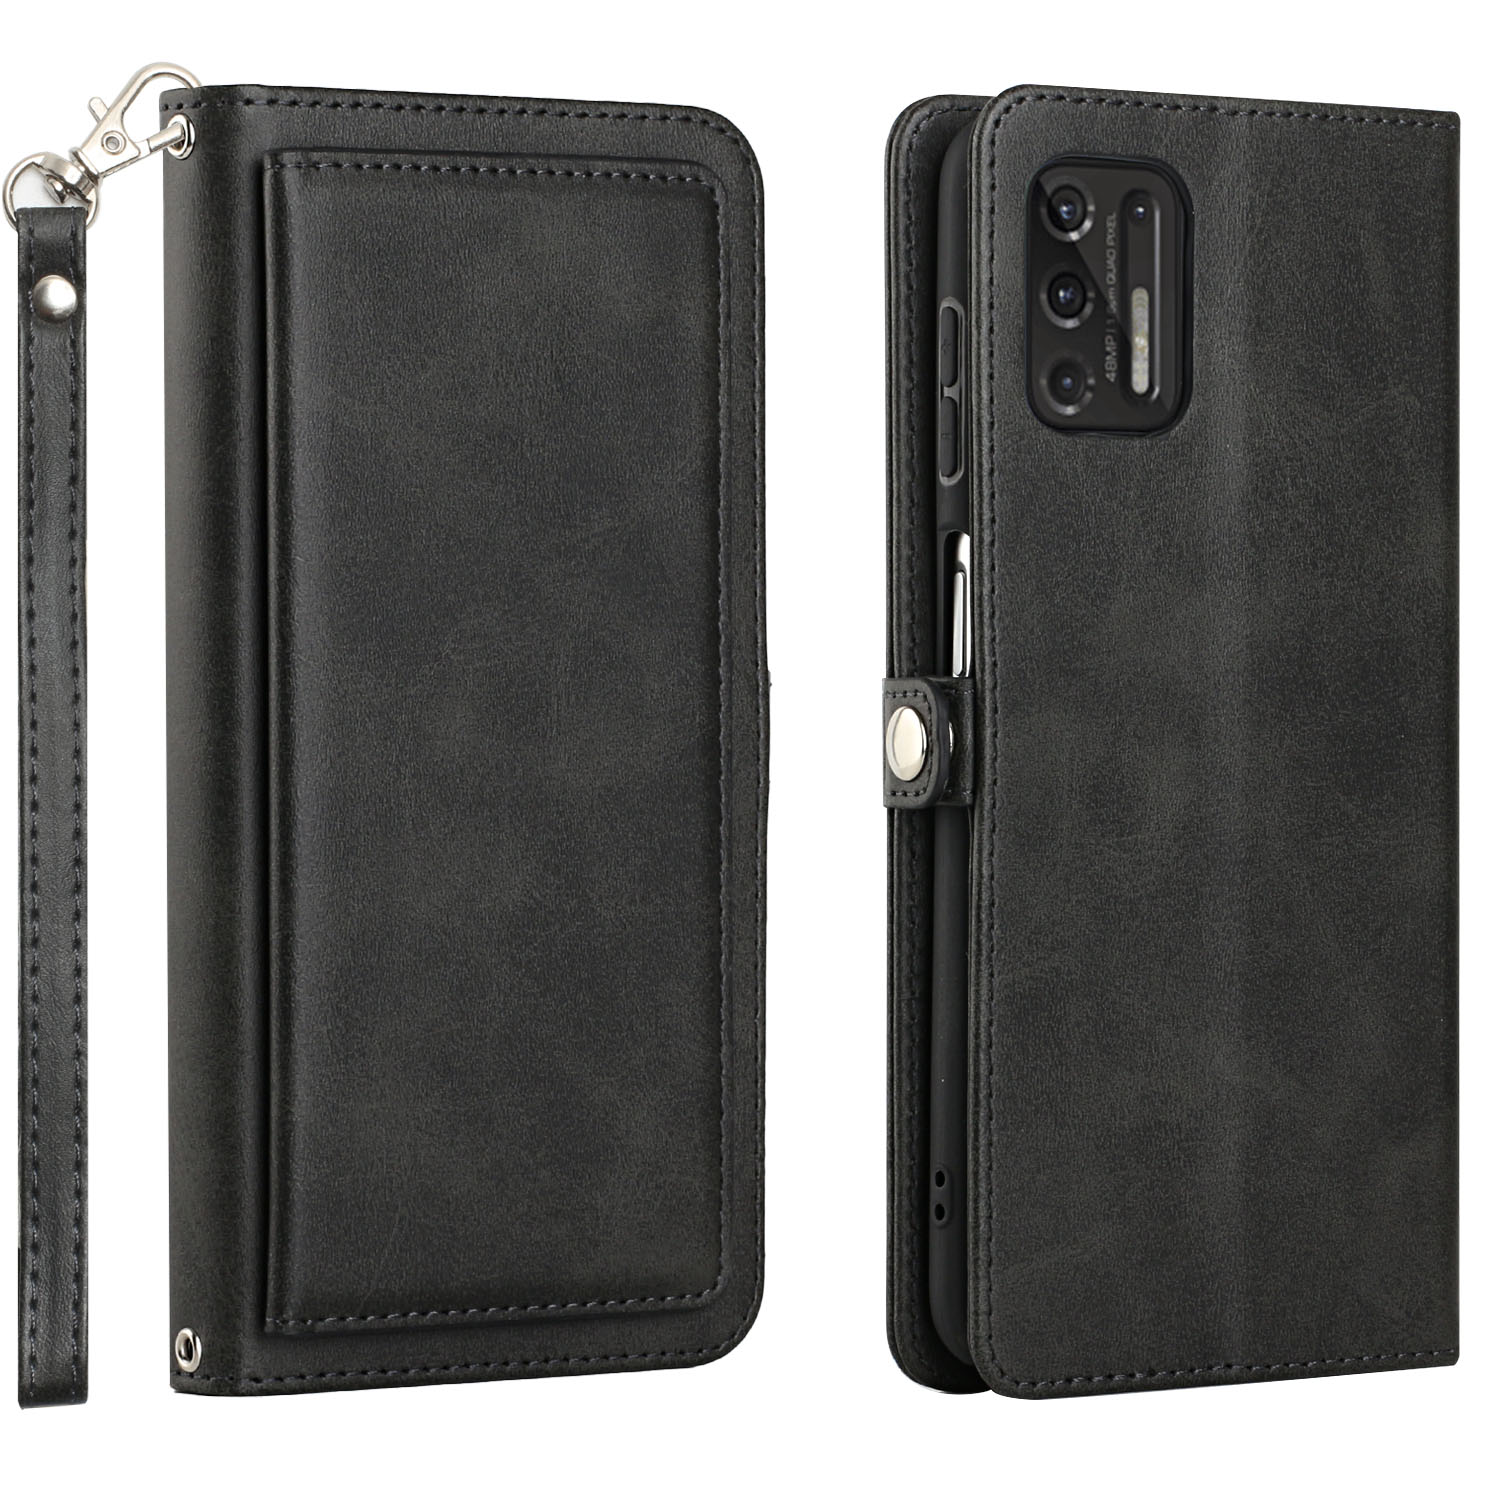 Premium PU Leather Folio WALLET Front Cover Case with Card Holder Slots and Wrist Strap for Motorola